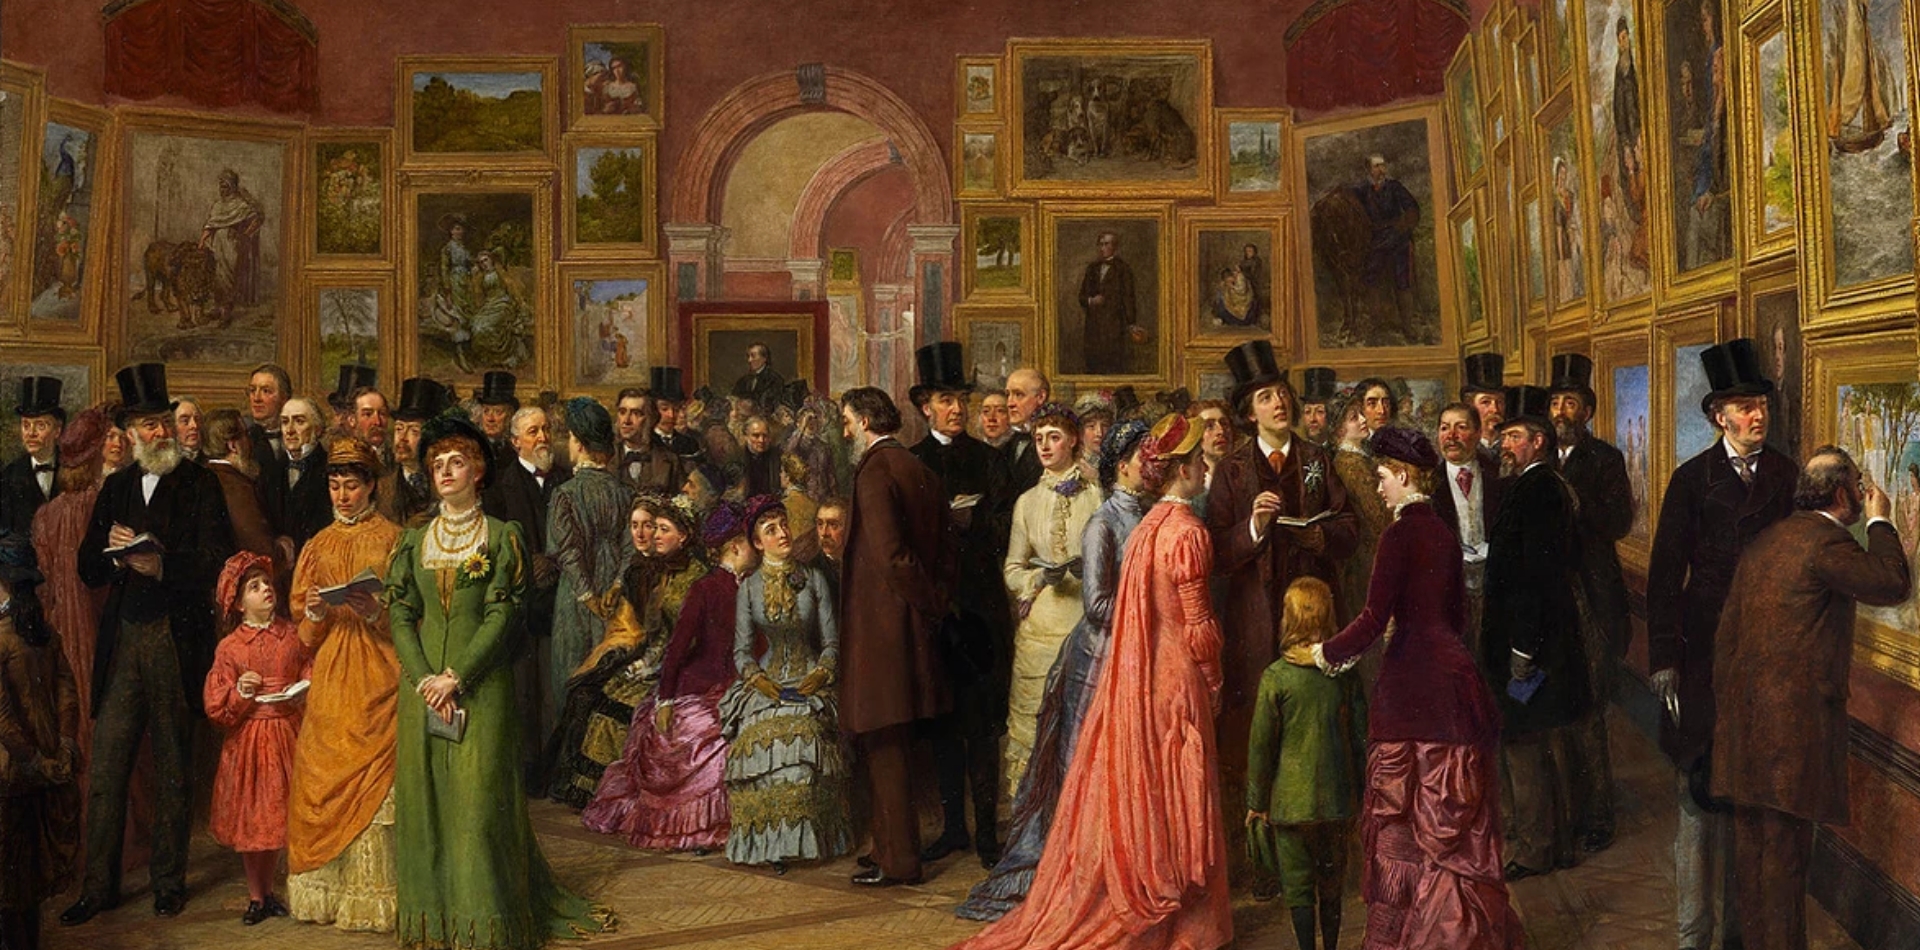 Men, women and children formally dressed in top hats, tuxedos and evening gowns engage in conversation in a cramped space with walls filled with paintings.